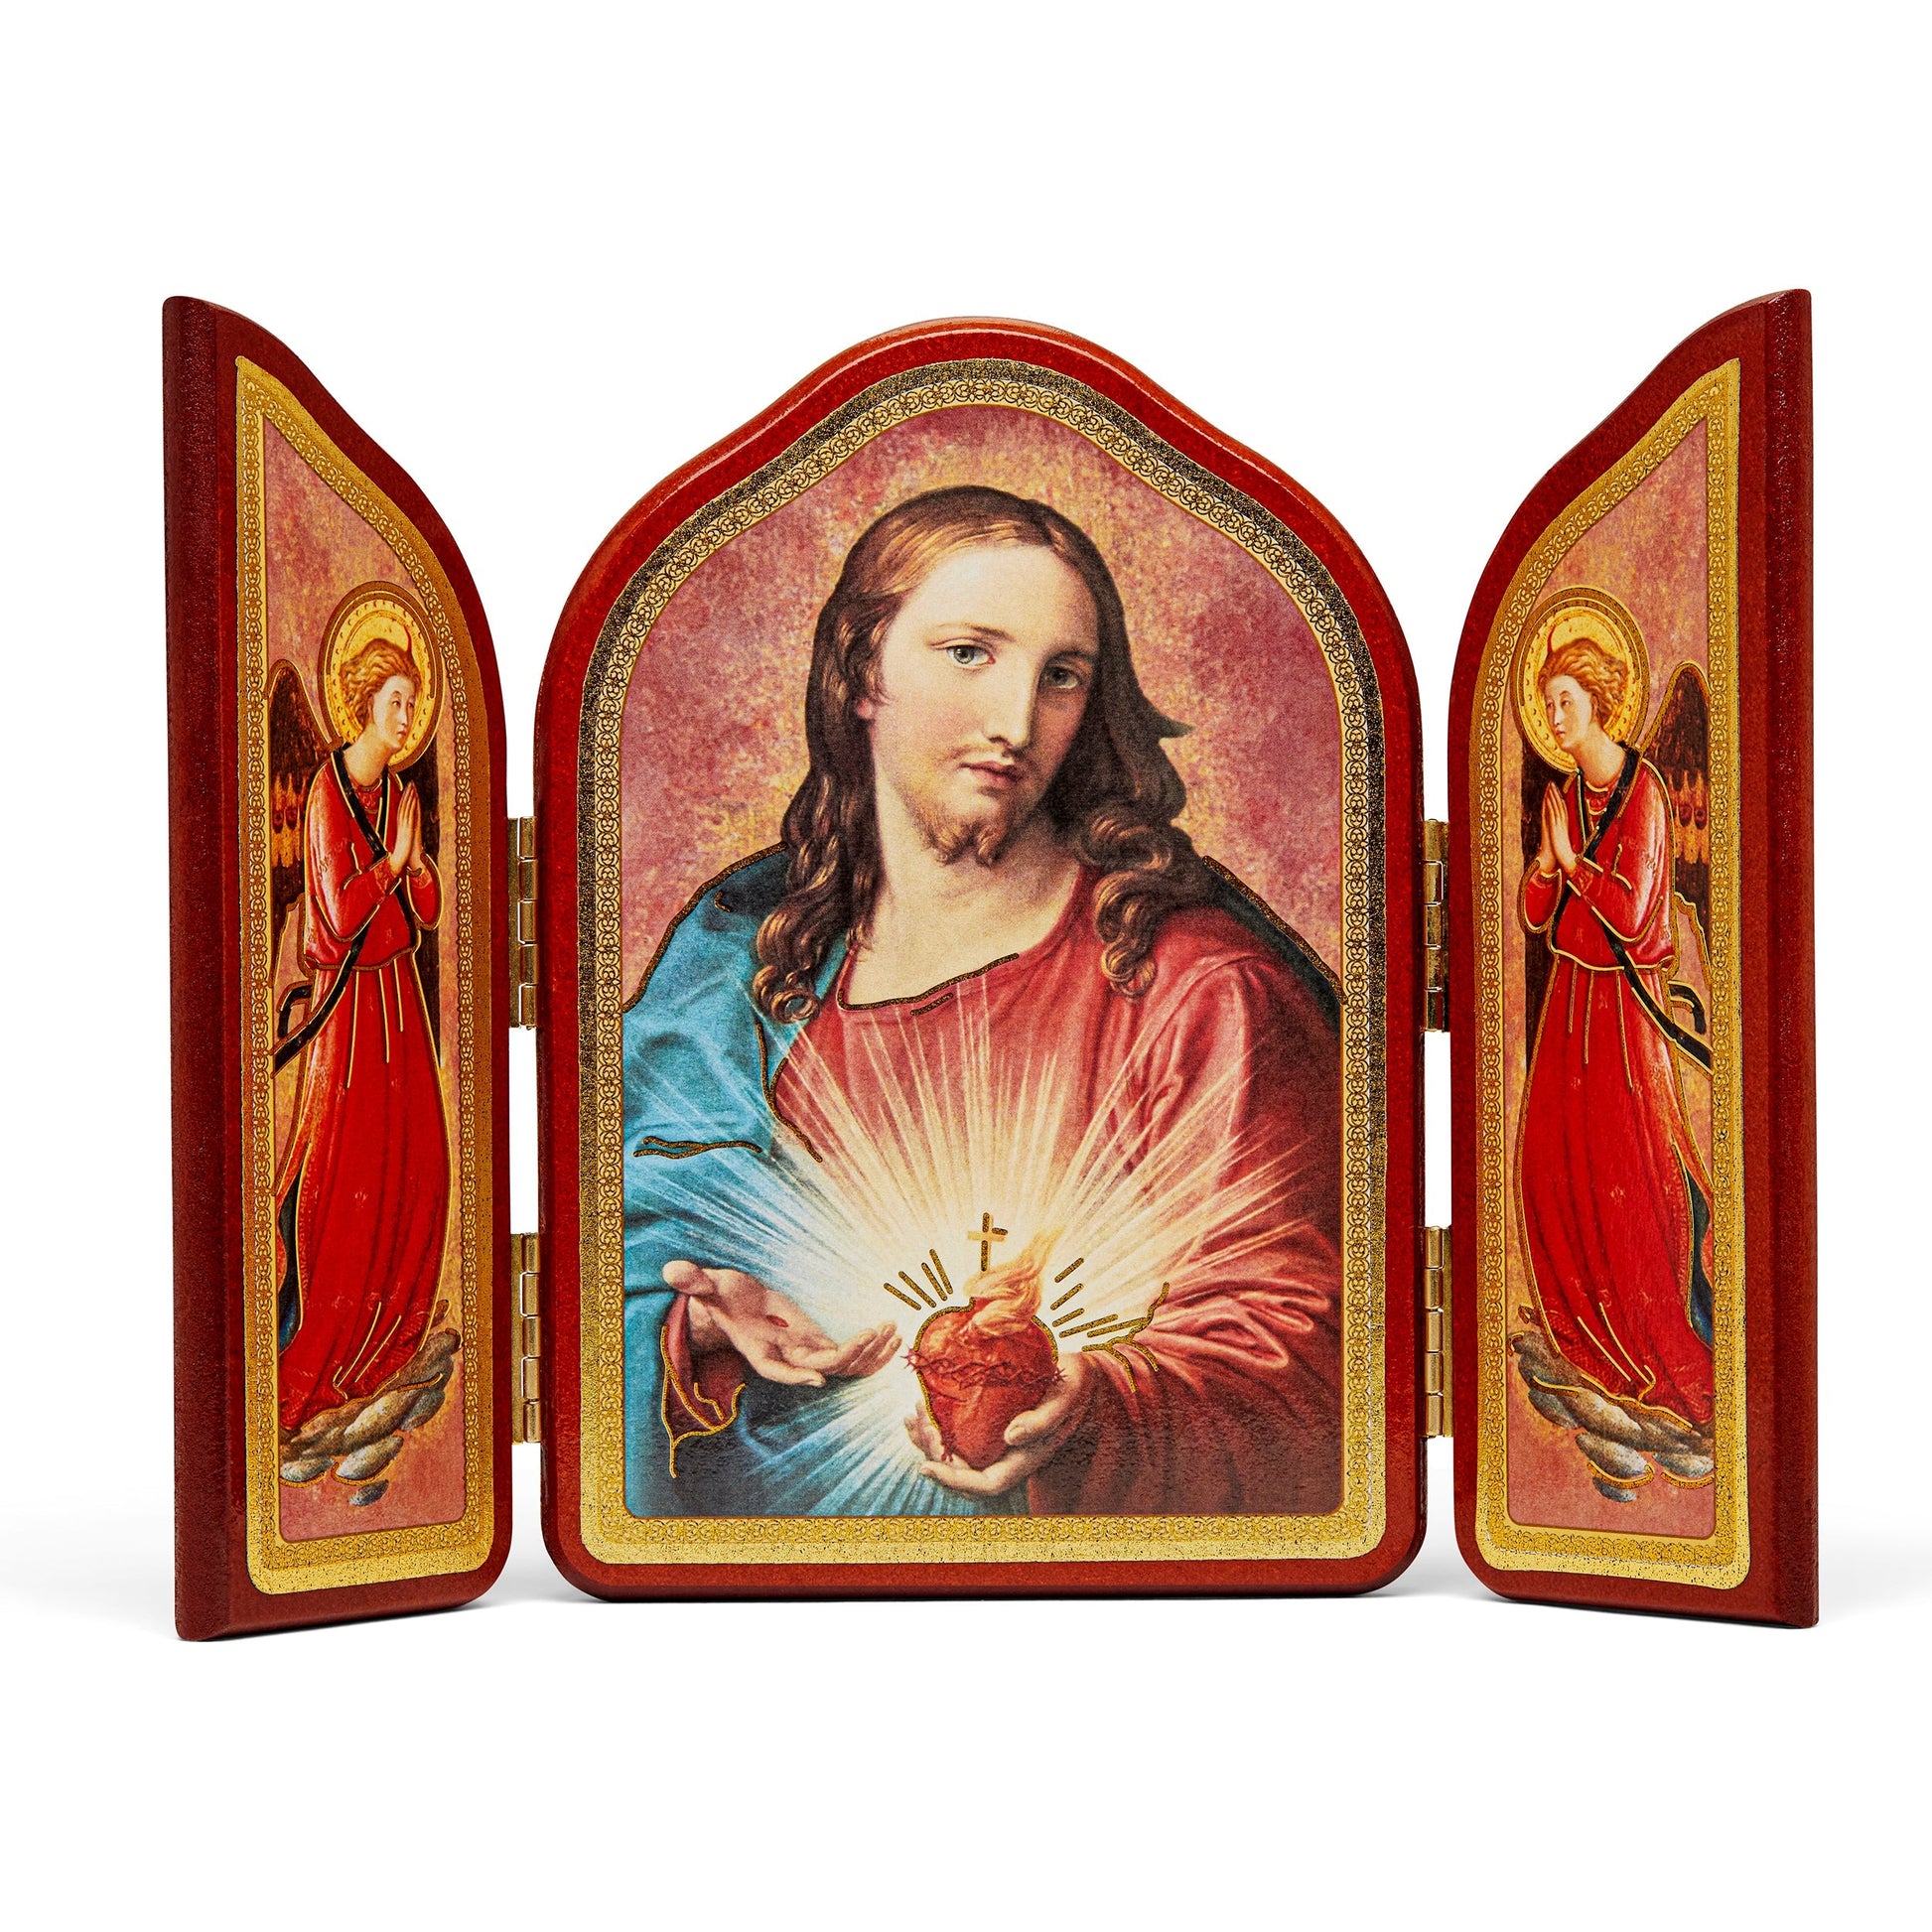 Mondo Cattolico 10.50x15 cm (4.13x5.91 in) Triptych in Red Wood With Sacred Heart of Jesus And Angels